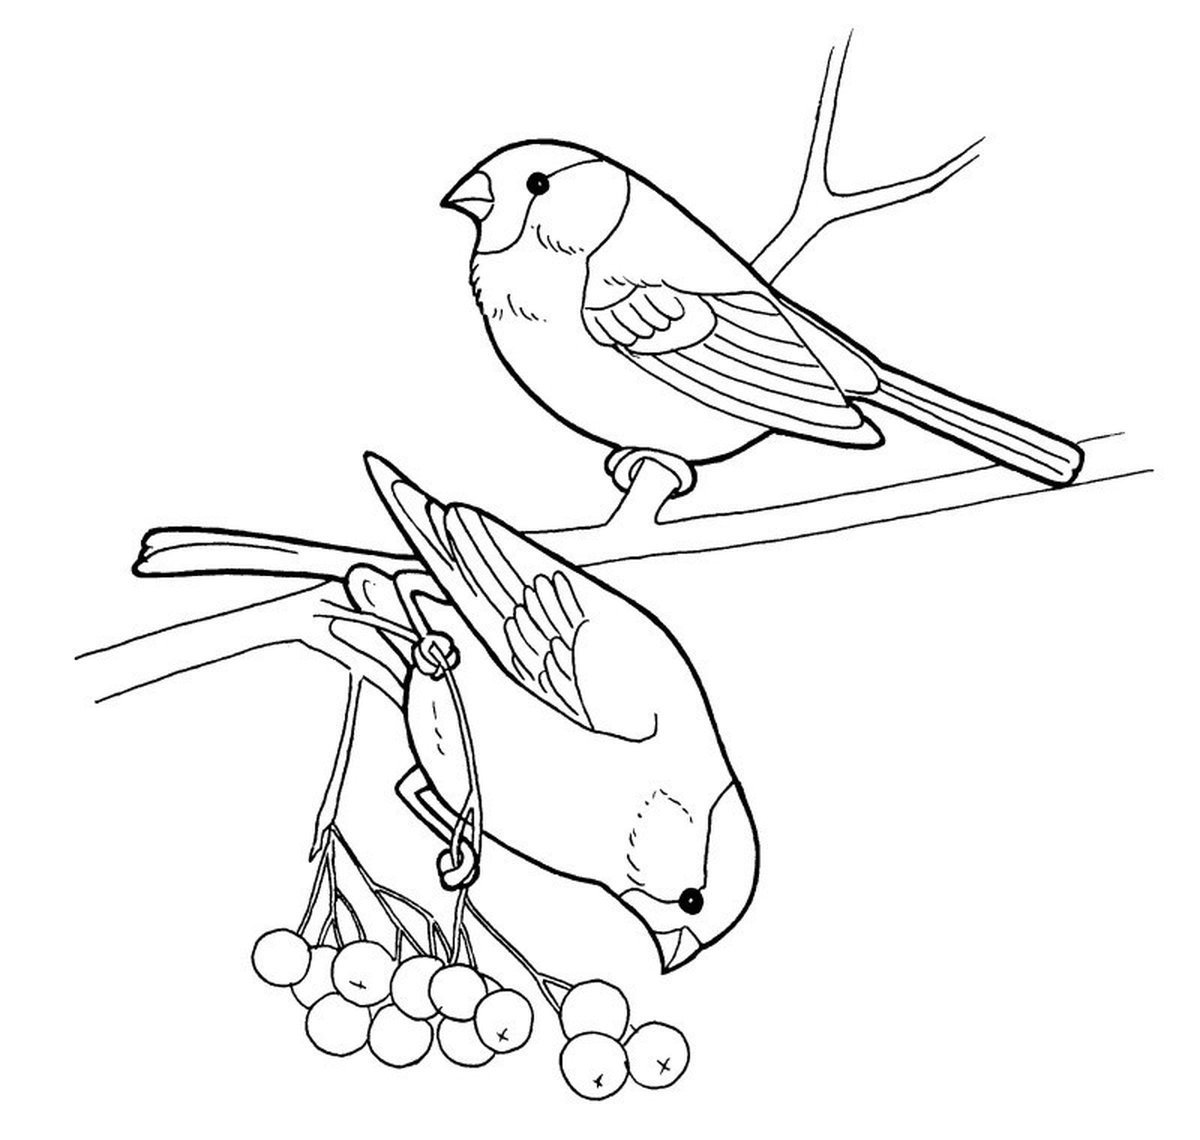 Live winter birds coloring for children 6-7 years old